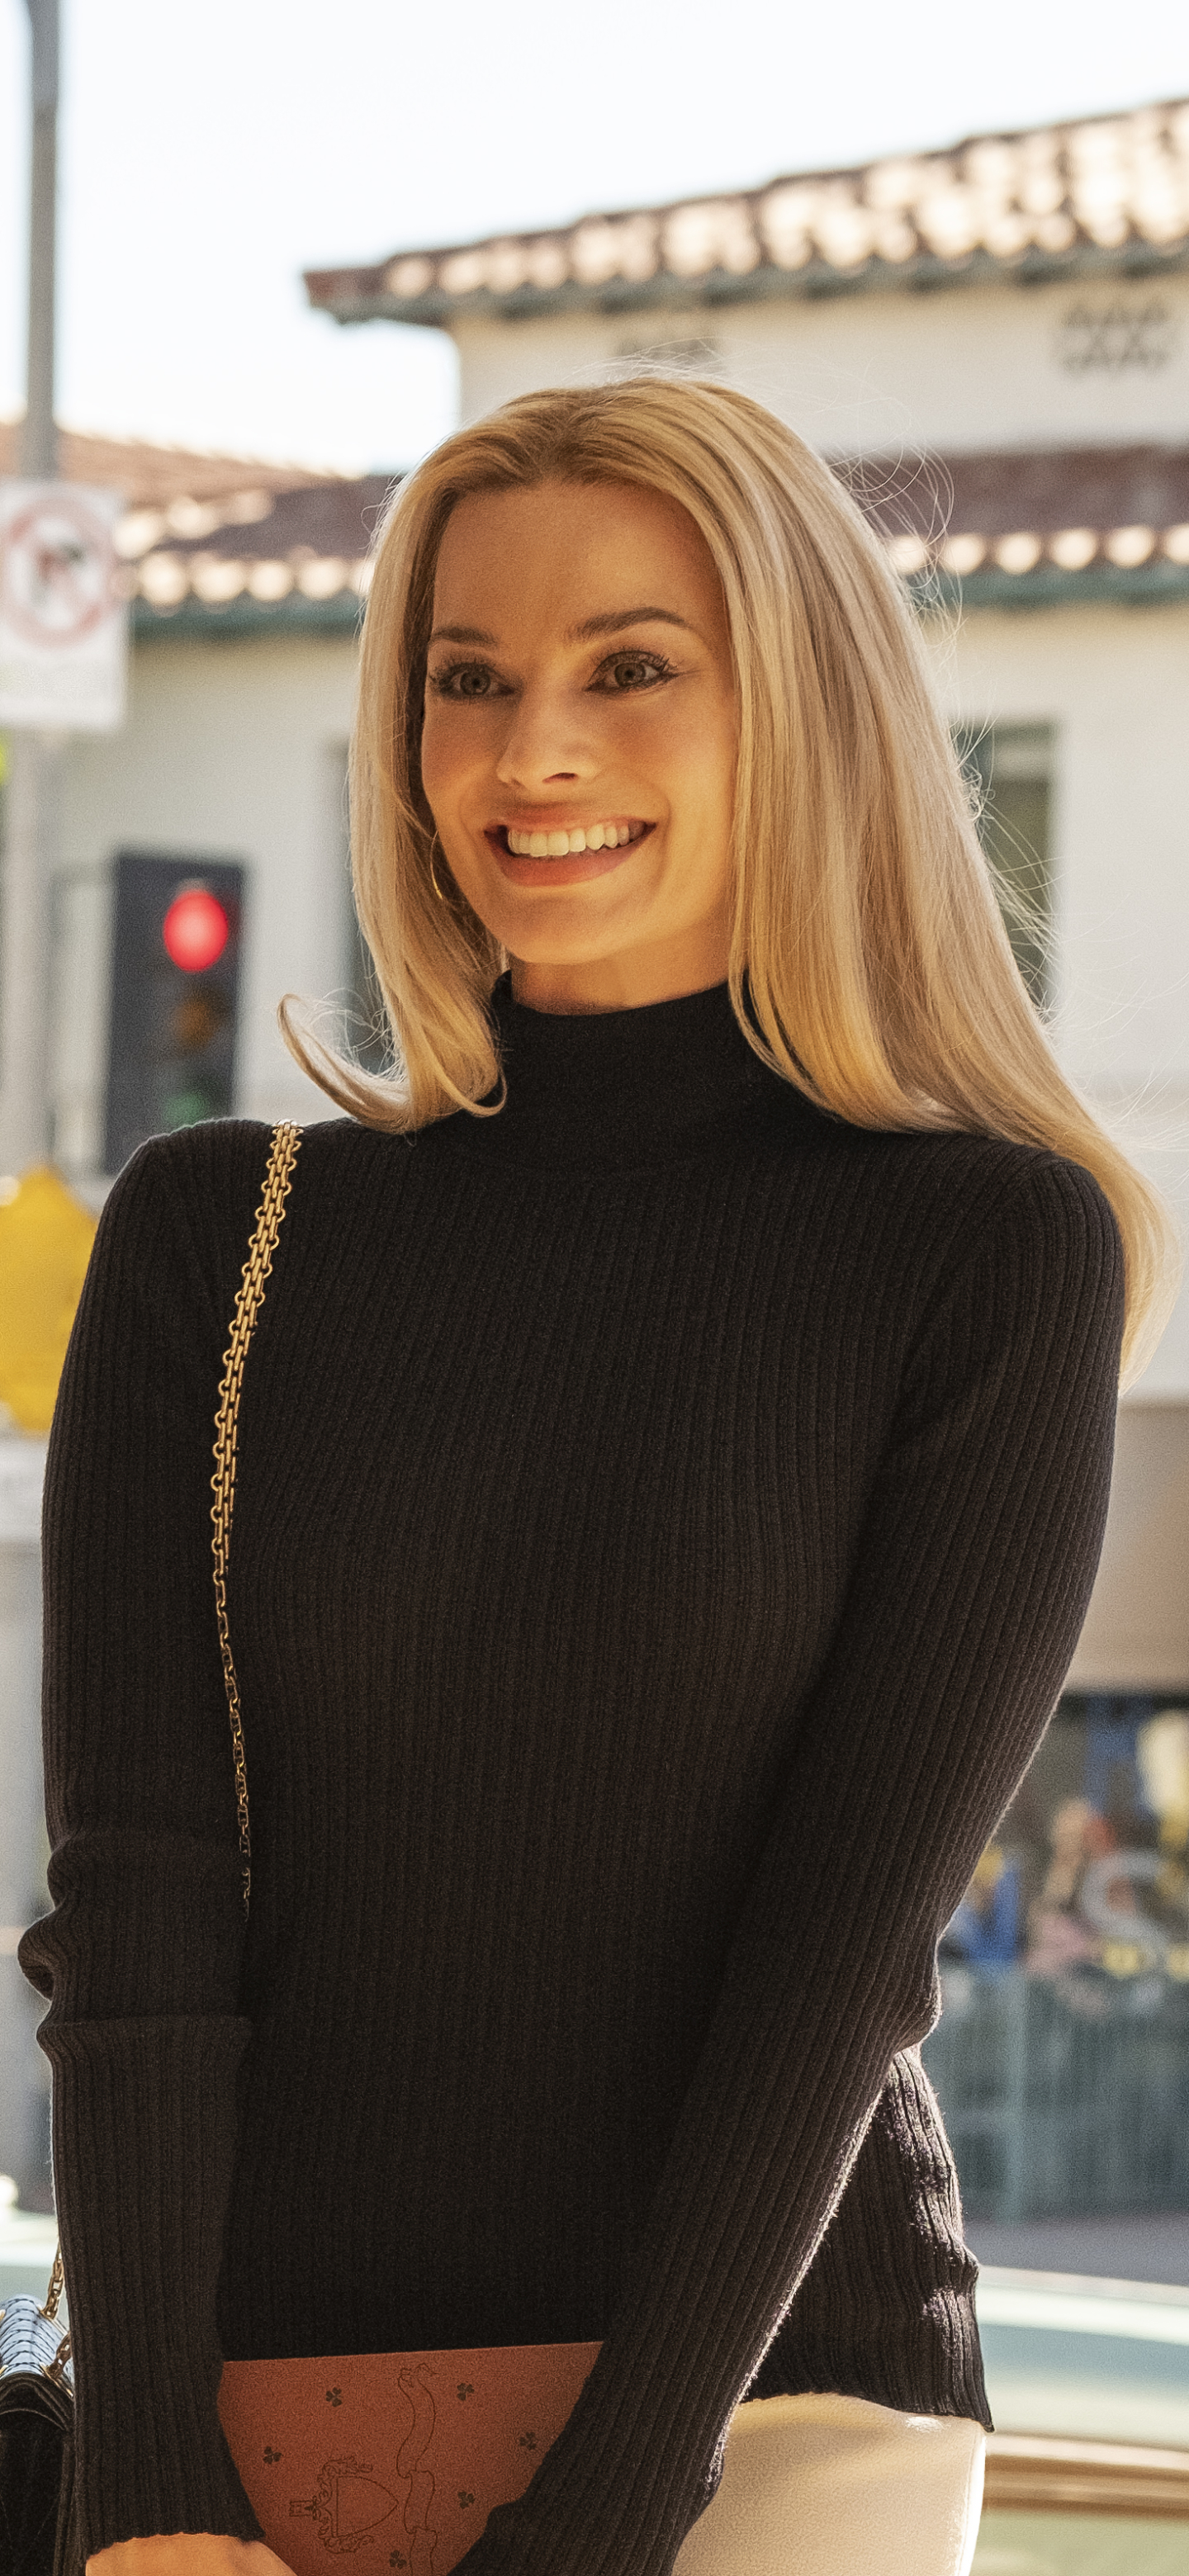 movie, once upon a time in hollywood, smile, actress, margot robbie, blonde, australian